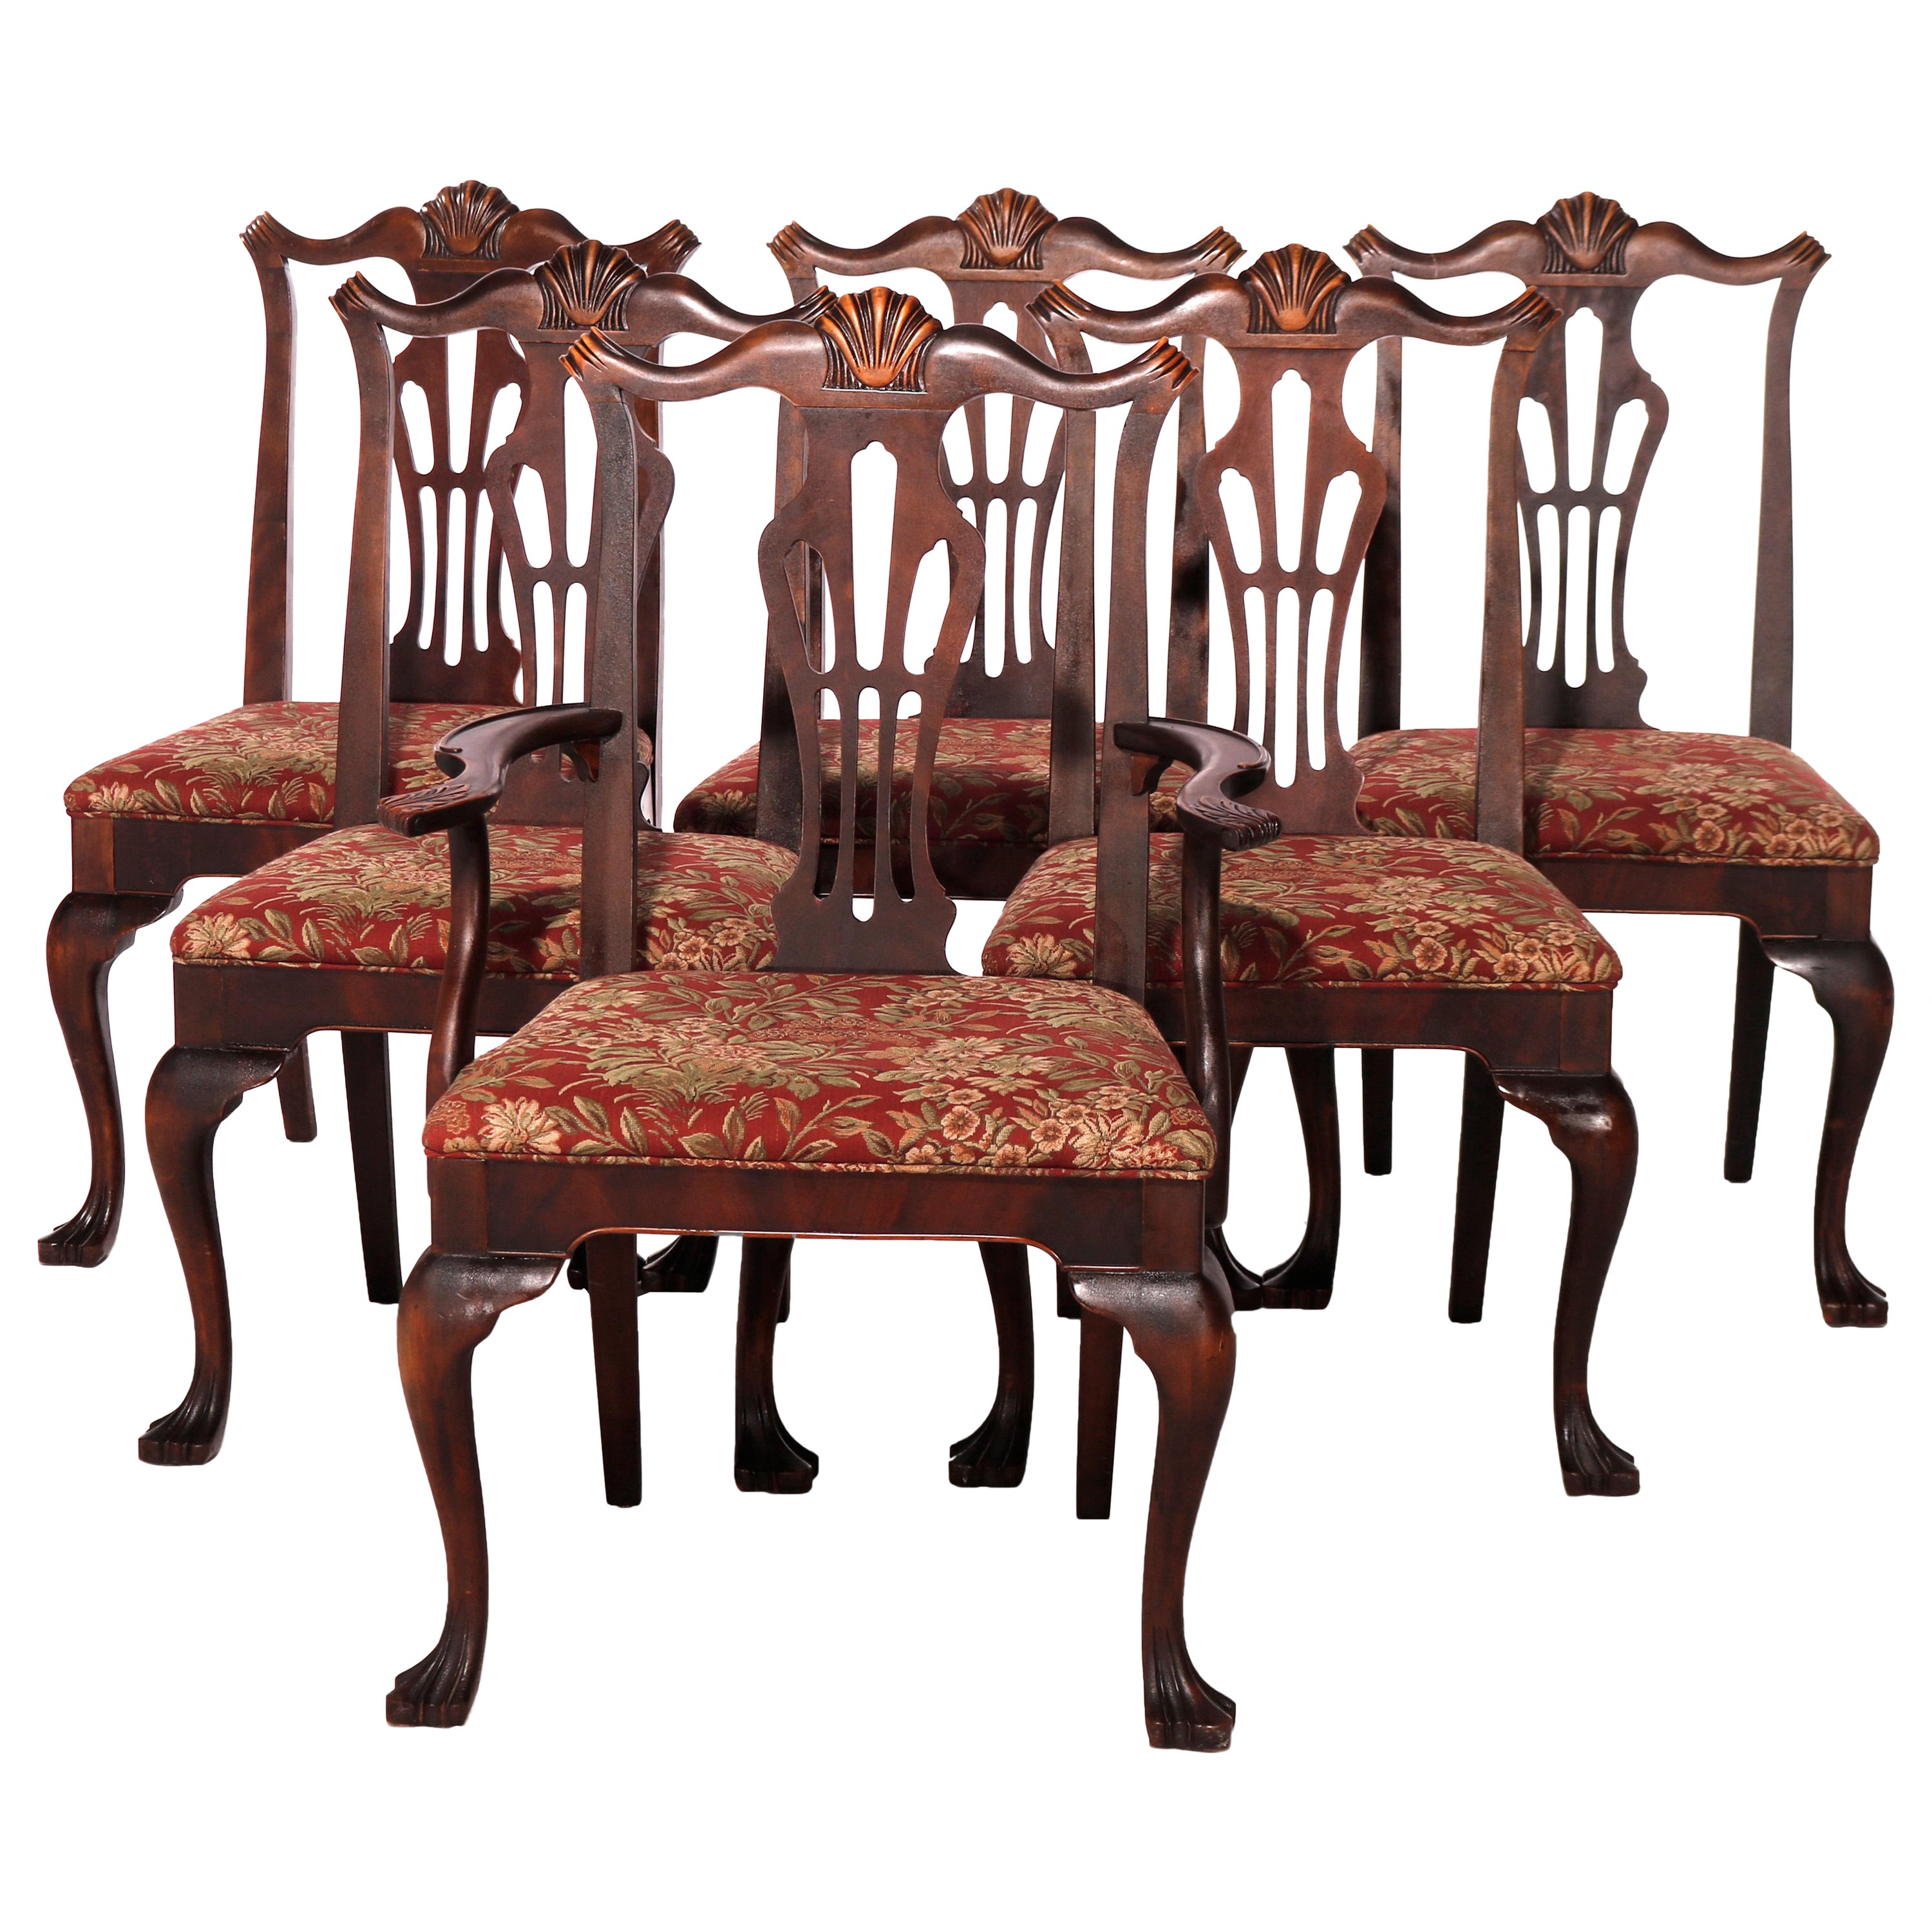 Six Antique Chippendale Style Mahogany Slat Back Dining Chairs, c1930